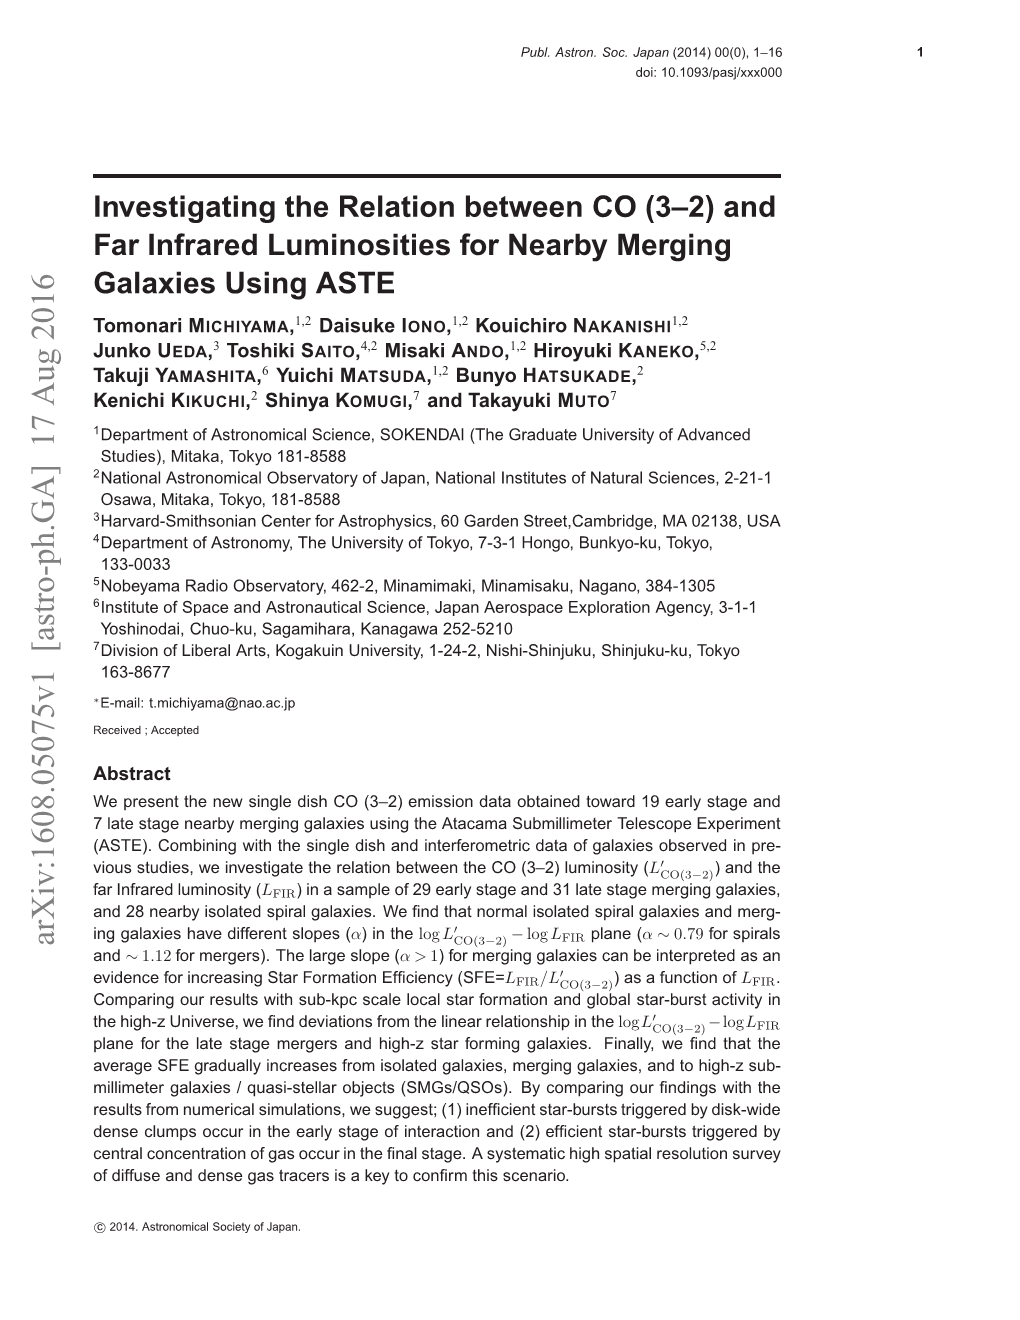 Investigating the Relation Between CO (3-2) and Far Infrared Luminosities